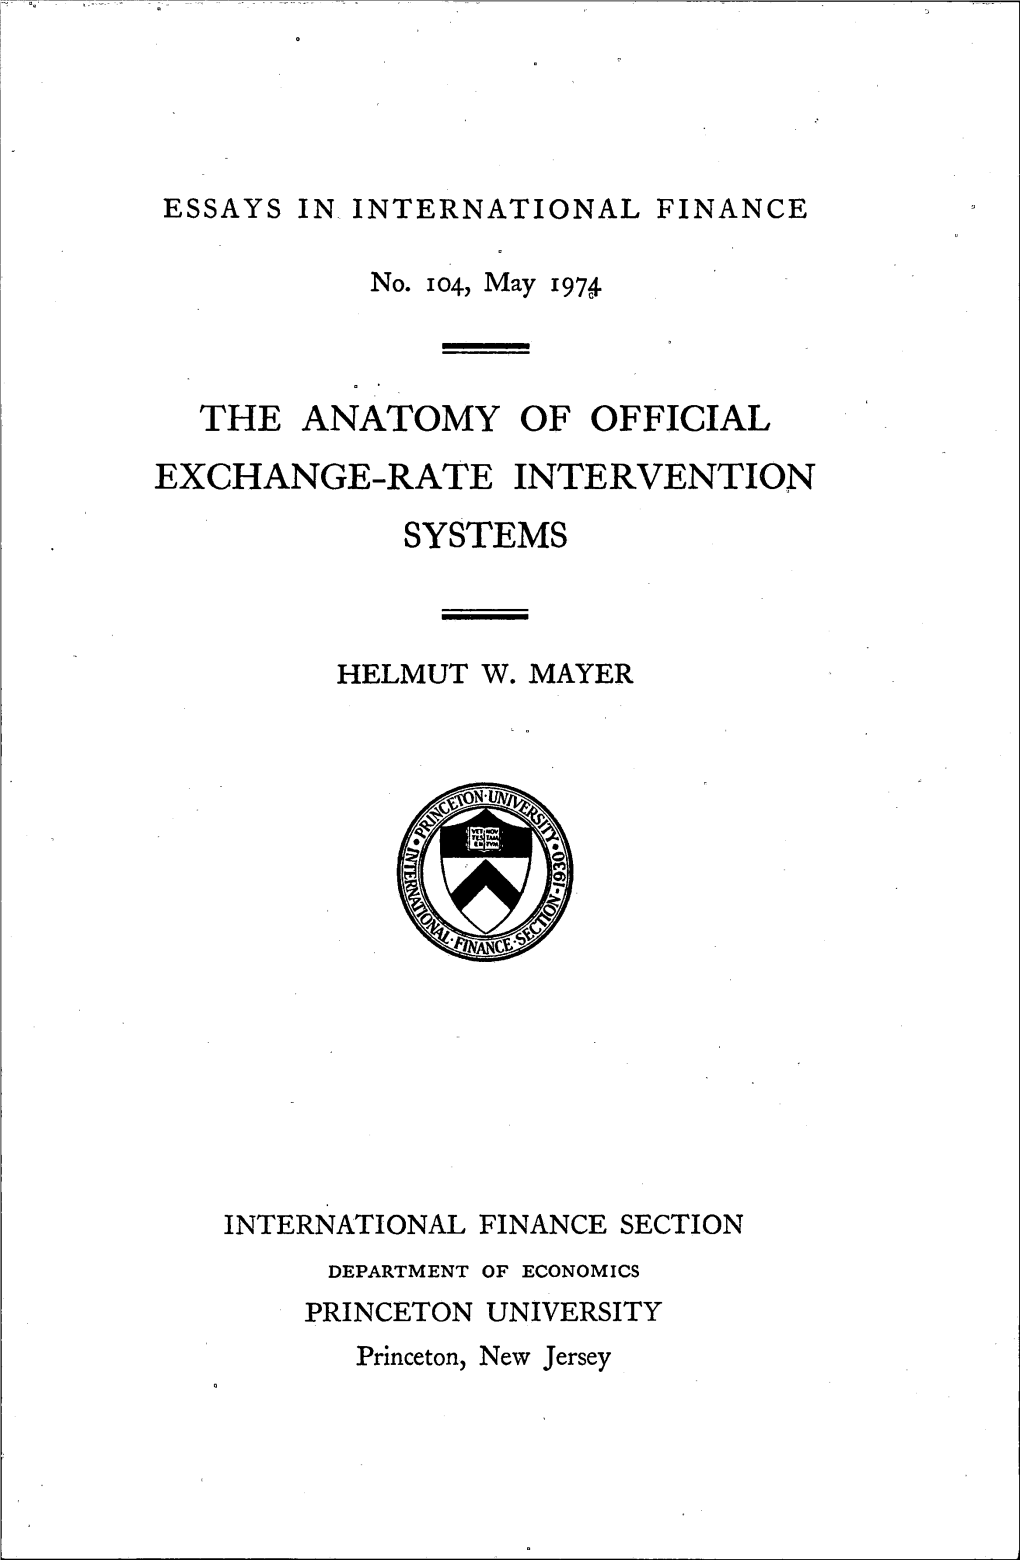 The Anatomy of Official Exchange-Rate Intervention Systems